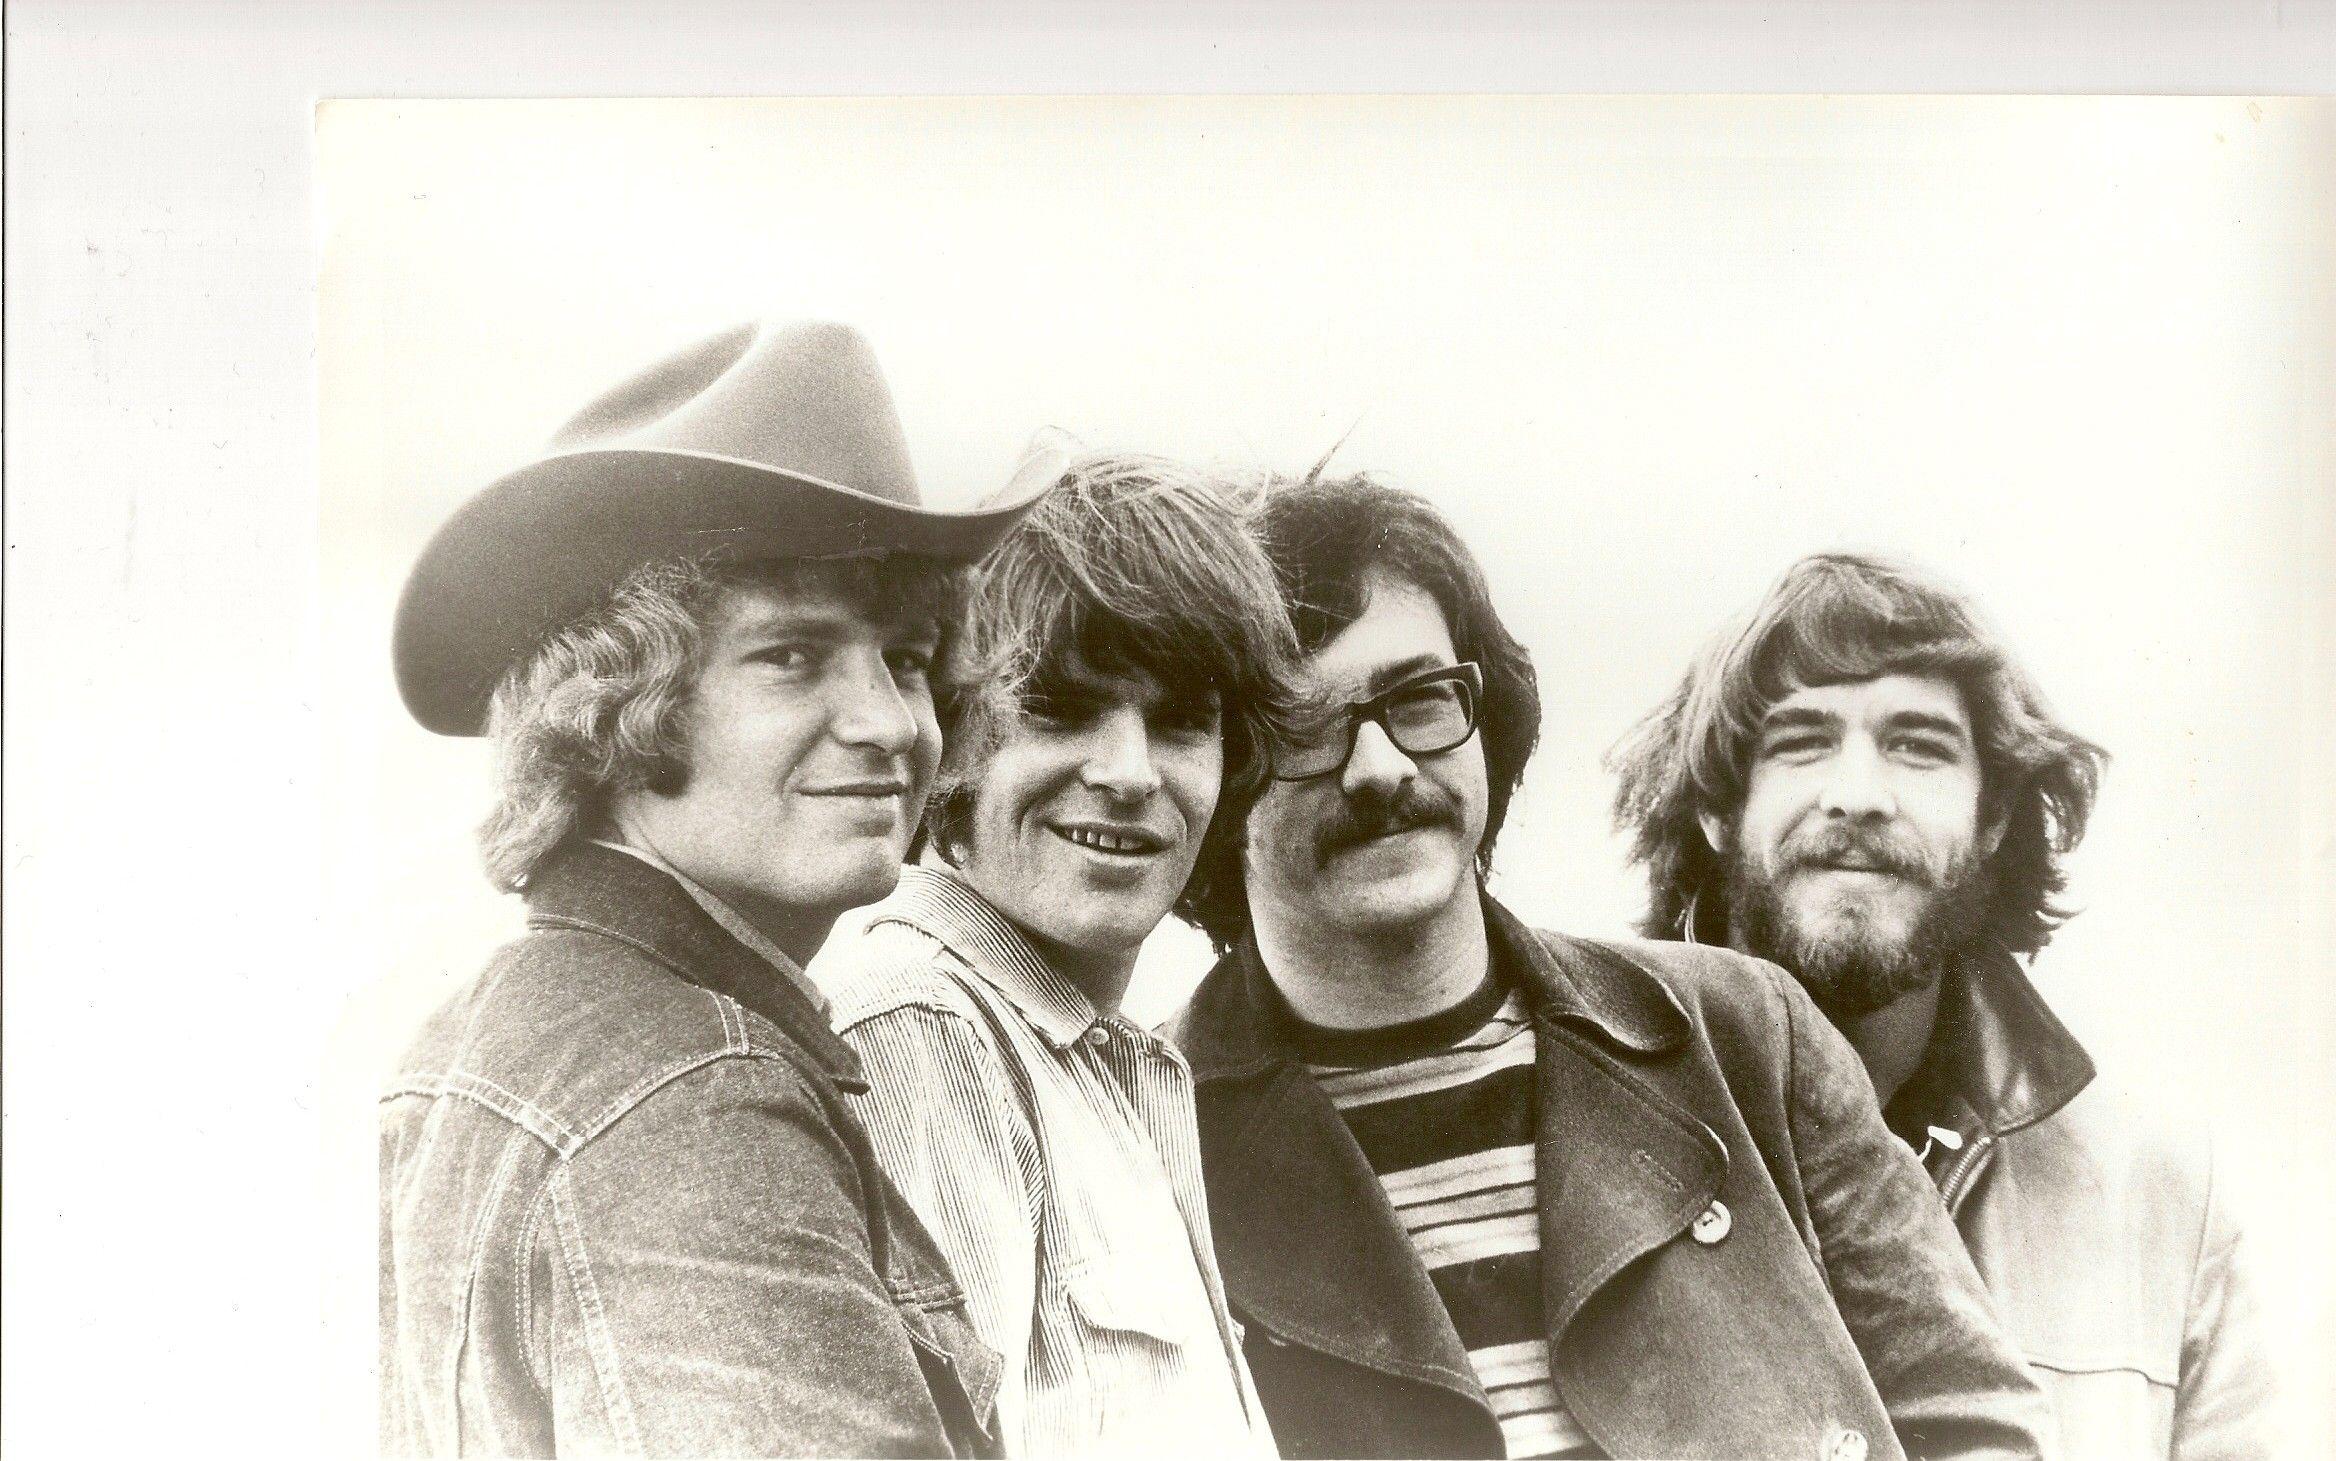 Creedence Clearwater Revival wallpaper, Music, HQ Creedence